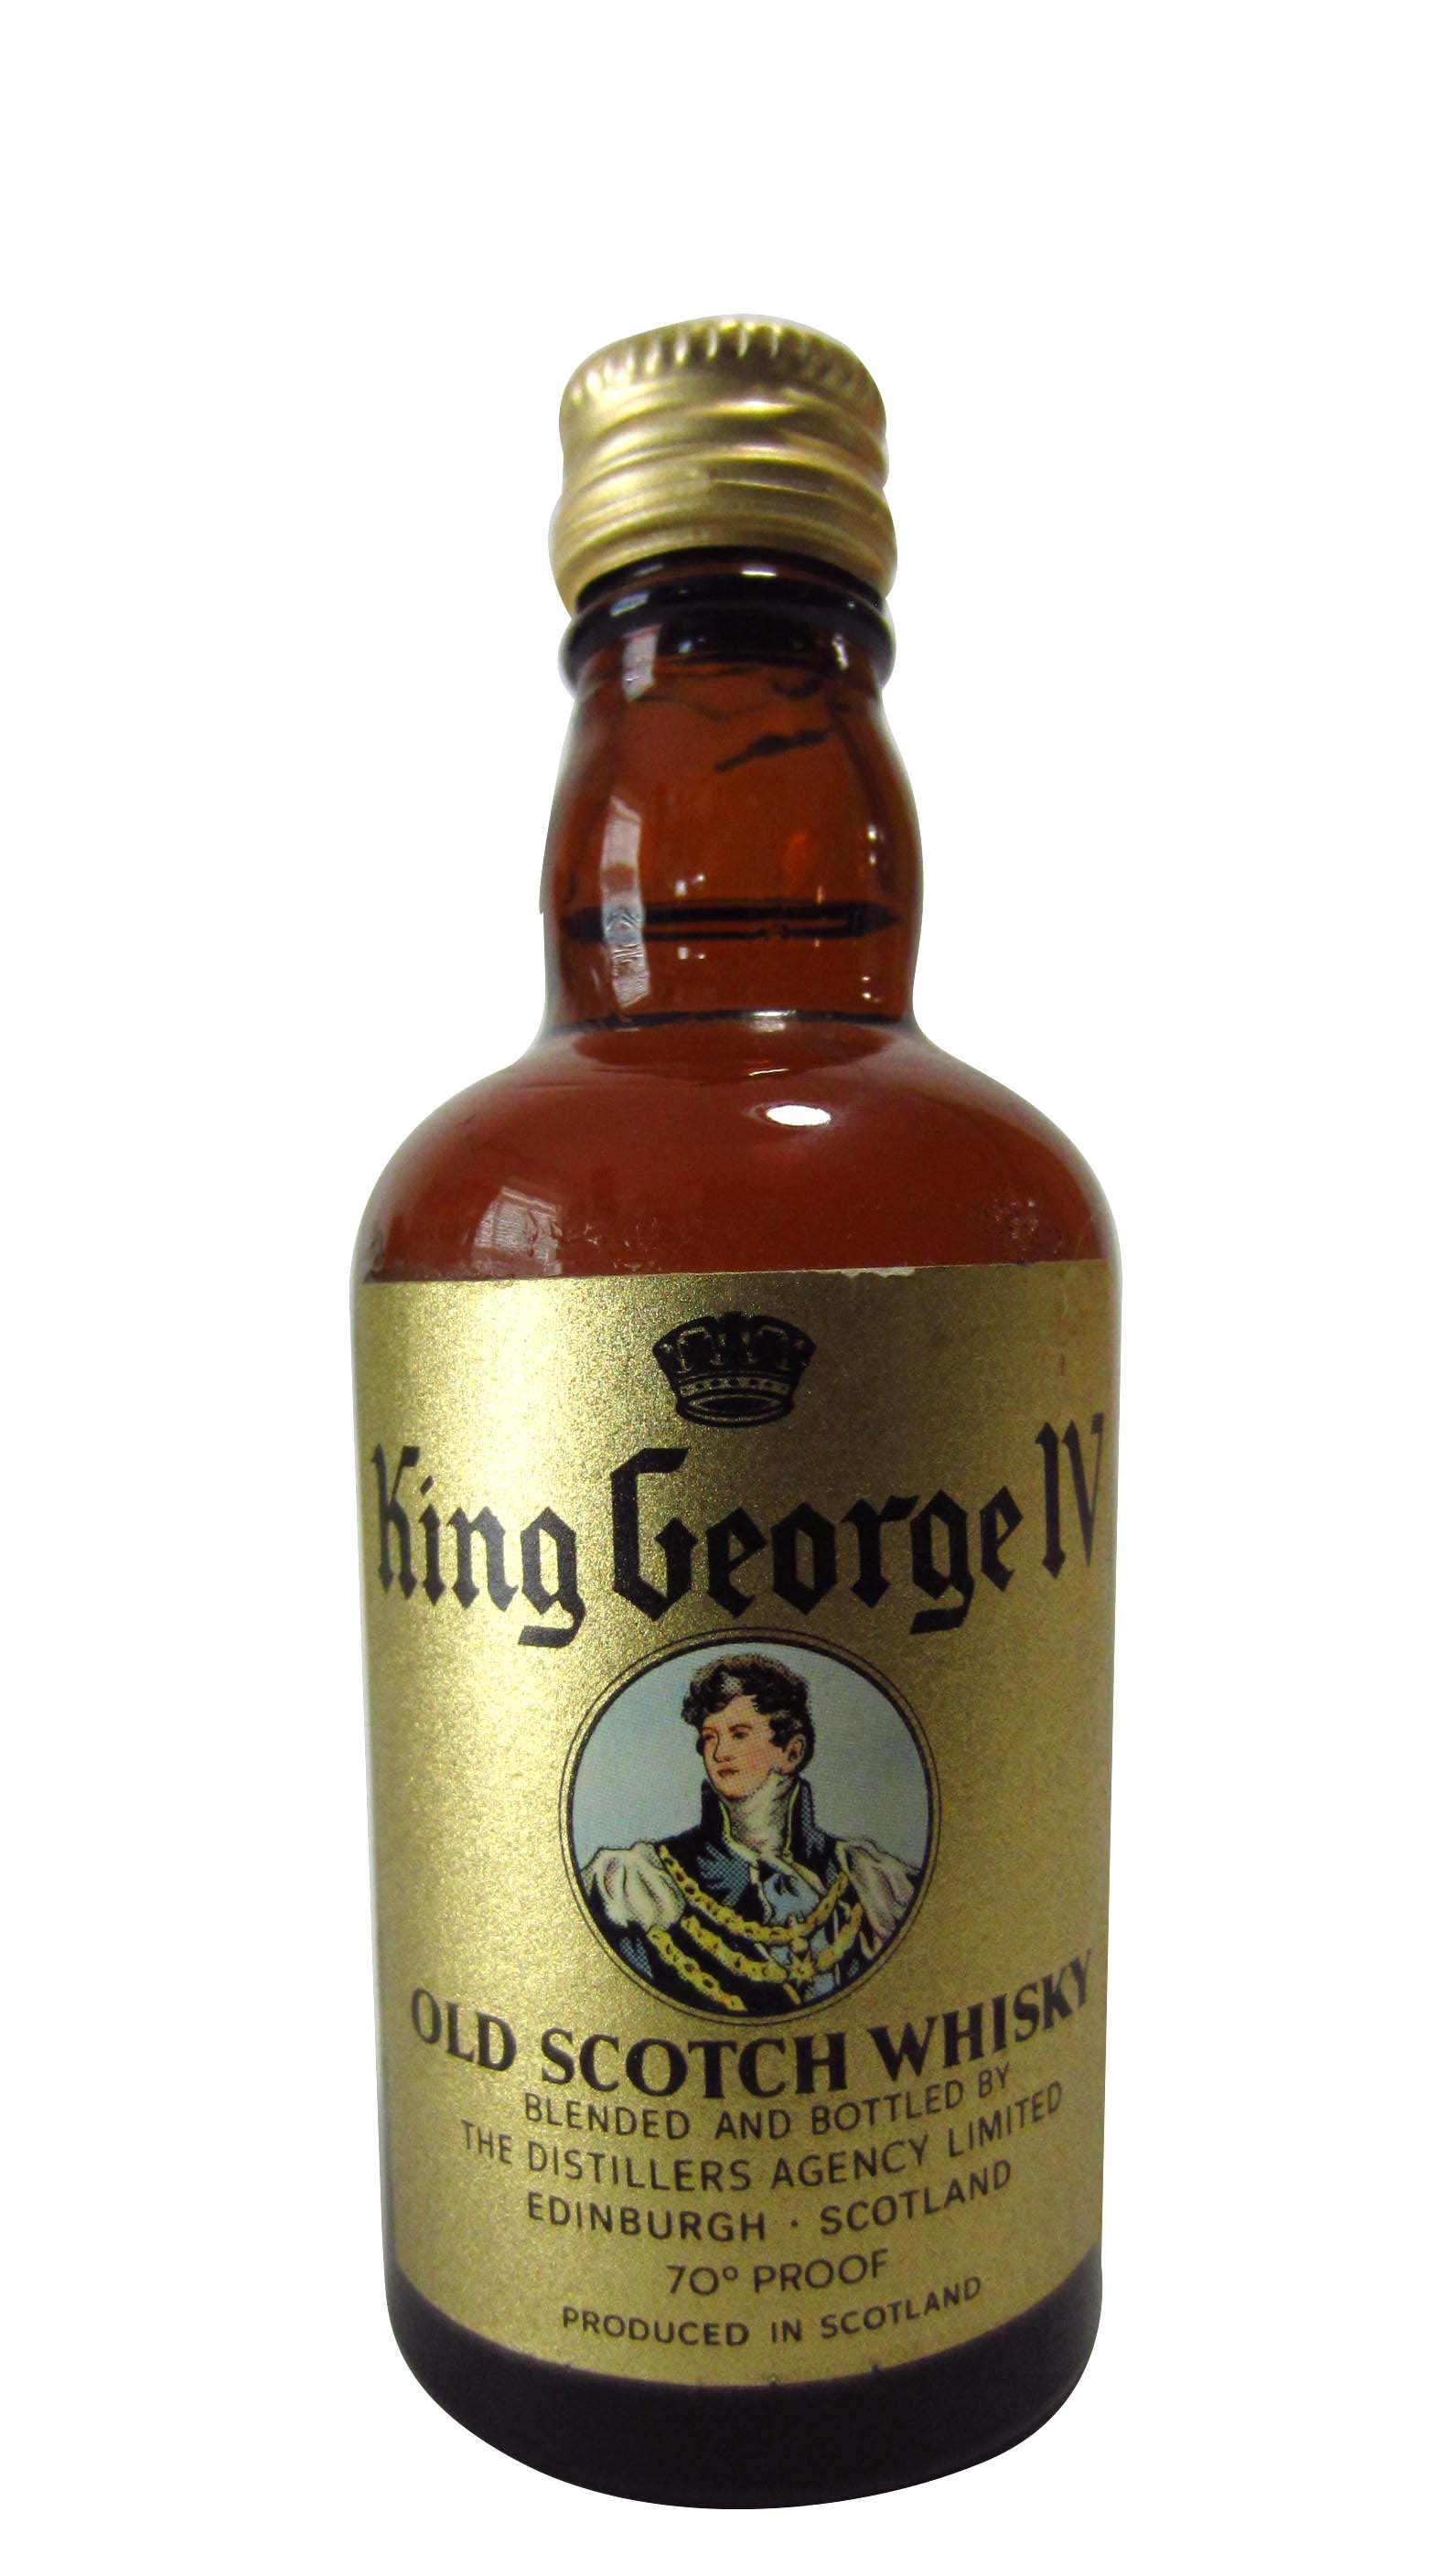 King George IV Blended Scotch Miniature - 5cl 40%